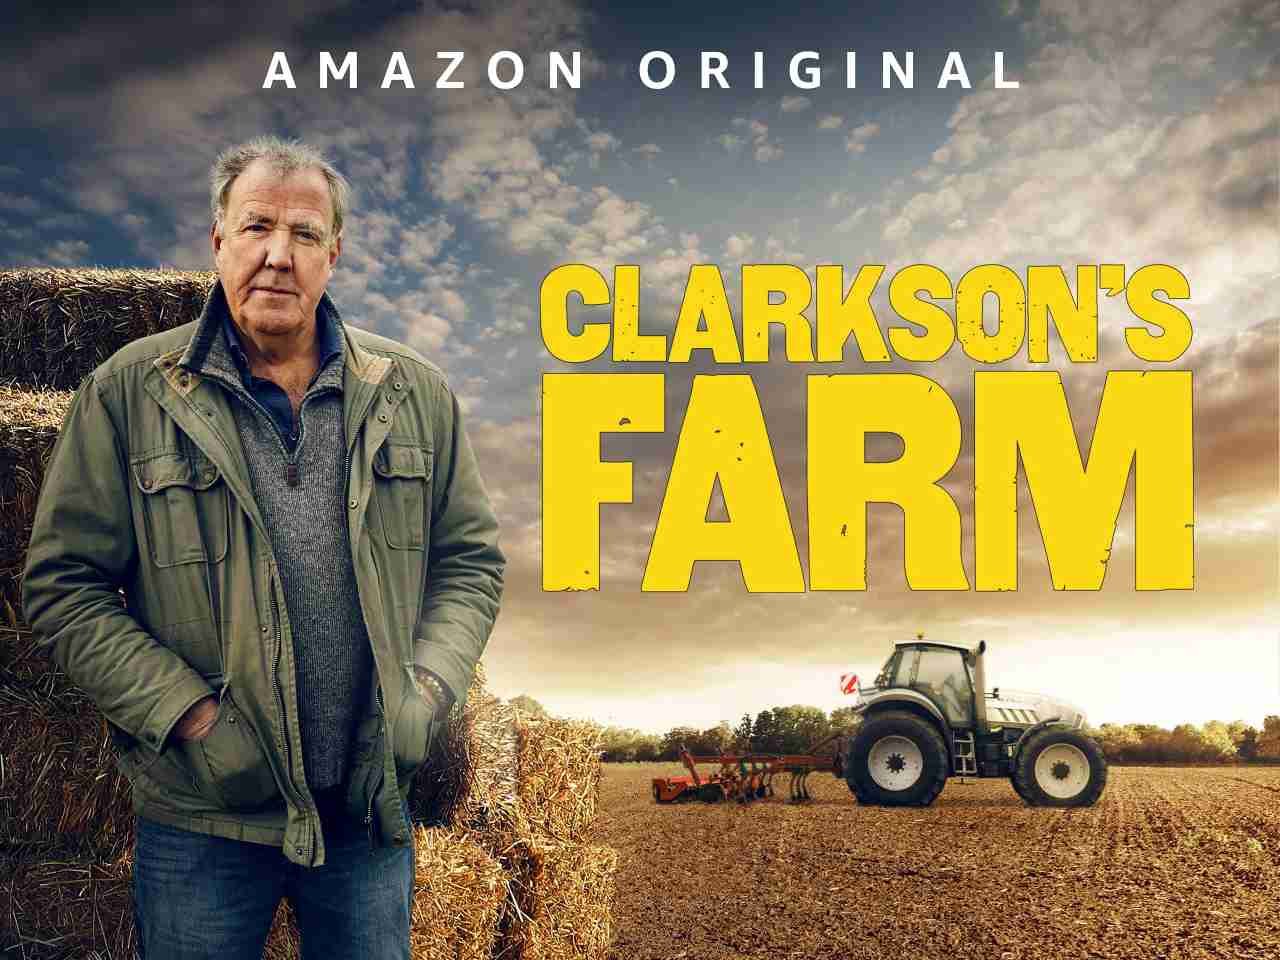 What solar system they use in Clarkson's Farms